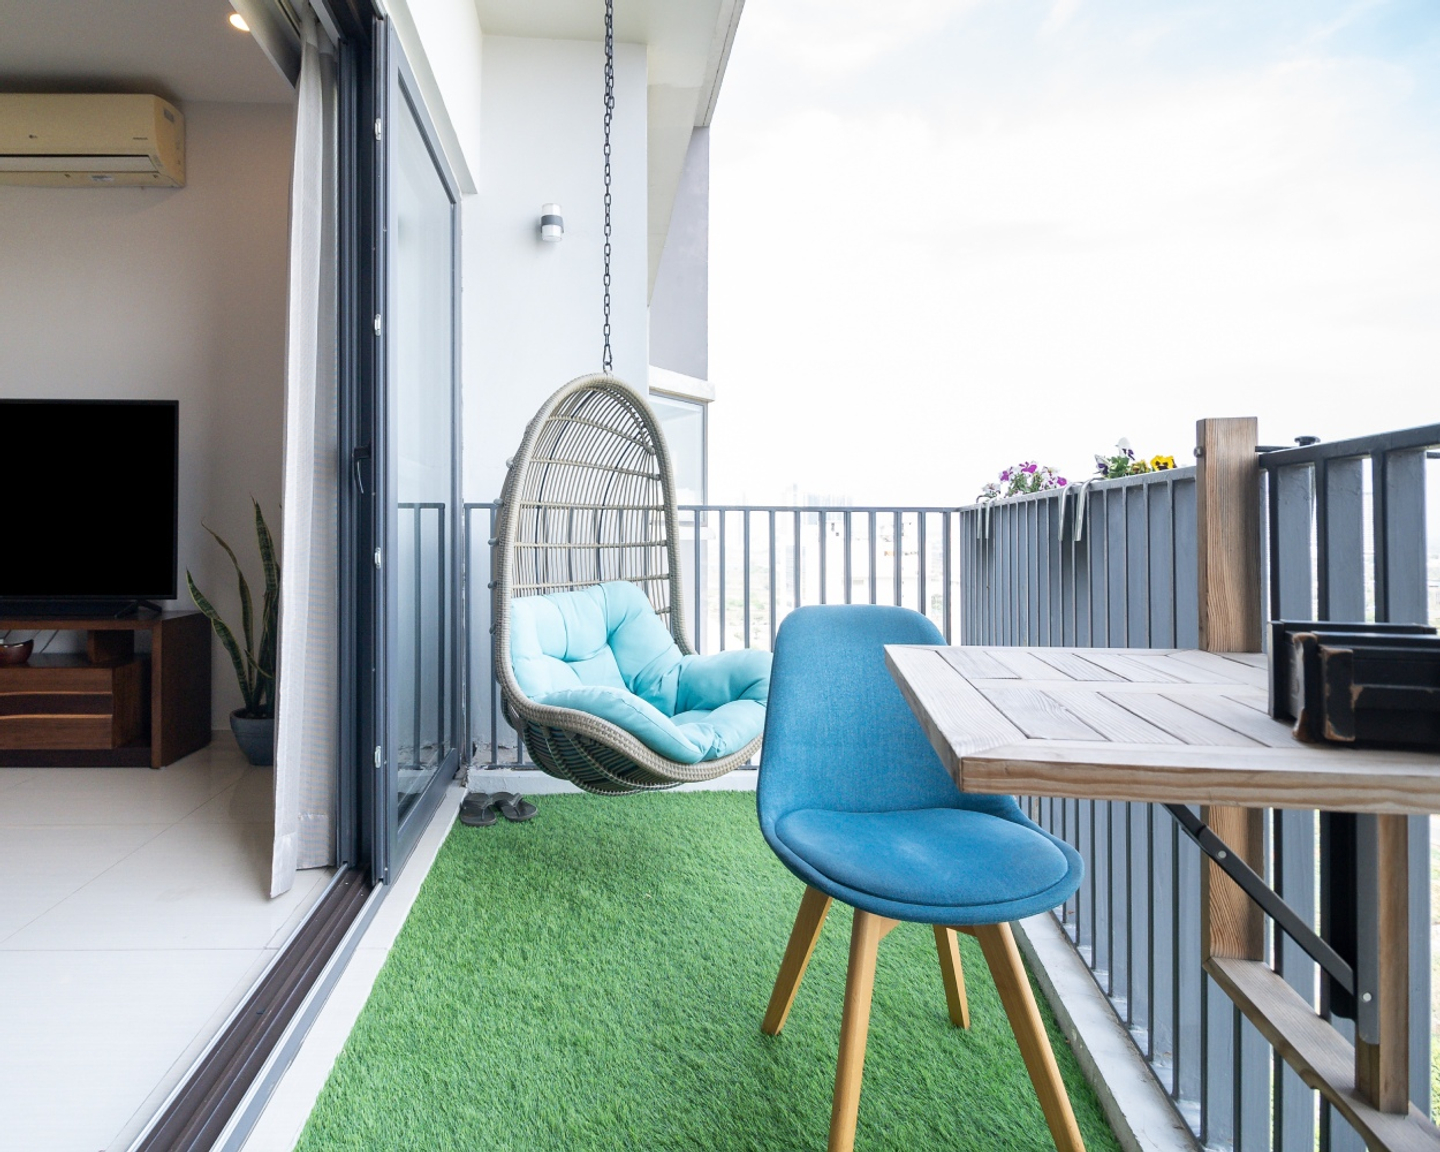 Open Balcony Design With A Chair And Swing - Livspace